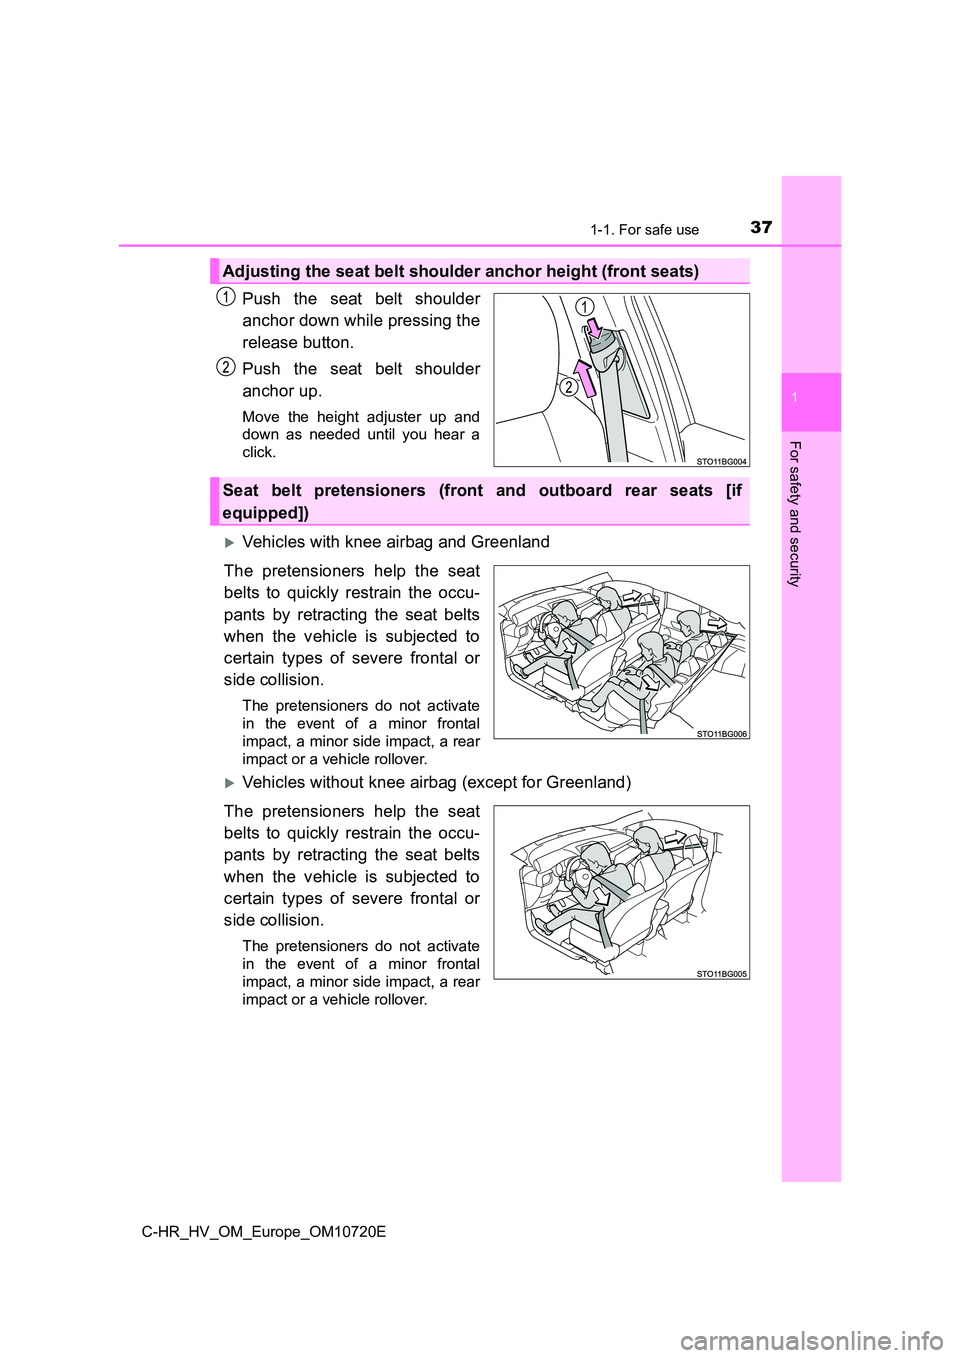 TOYOTA C-HR 2022  Owners Manual 371-1. For safe use
1
For safety and security
C-HR_HV_OM_Europe_OM10720E
Push  the  seat  belt  shoulder 
anchor down while pressing the 
release button. 
Push  the  seat  belt  shoulder 
anchor up.
M